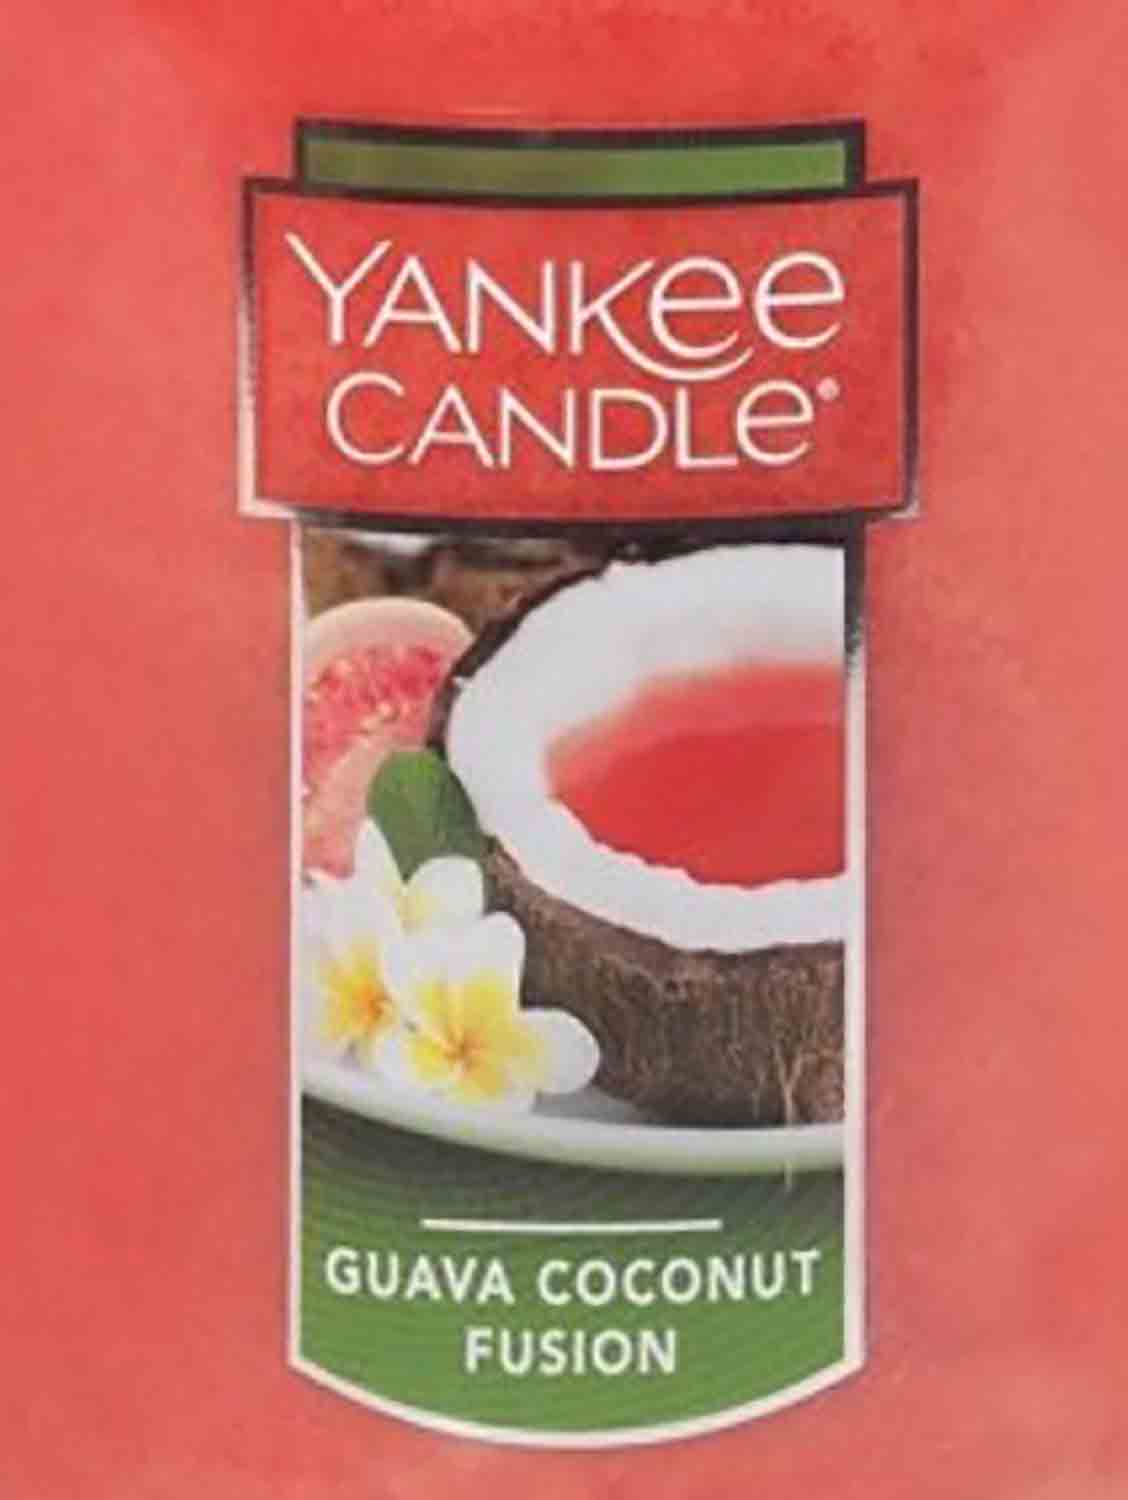 Yankee Candle Guava Coconut Fusion 22 g - Crumble vosk